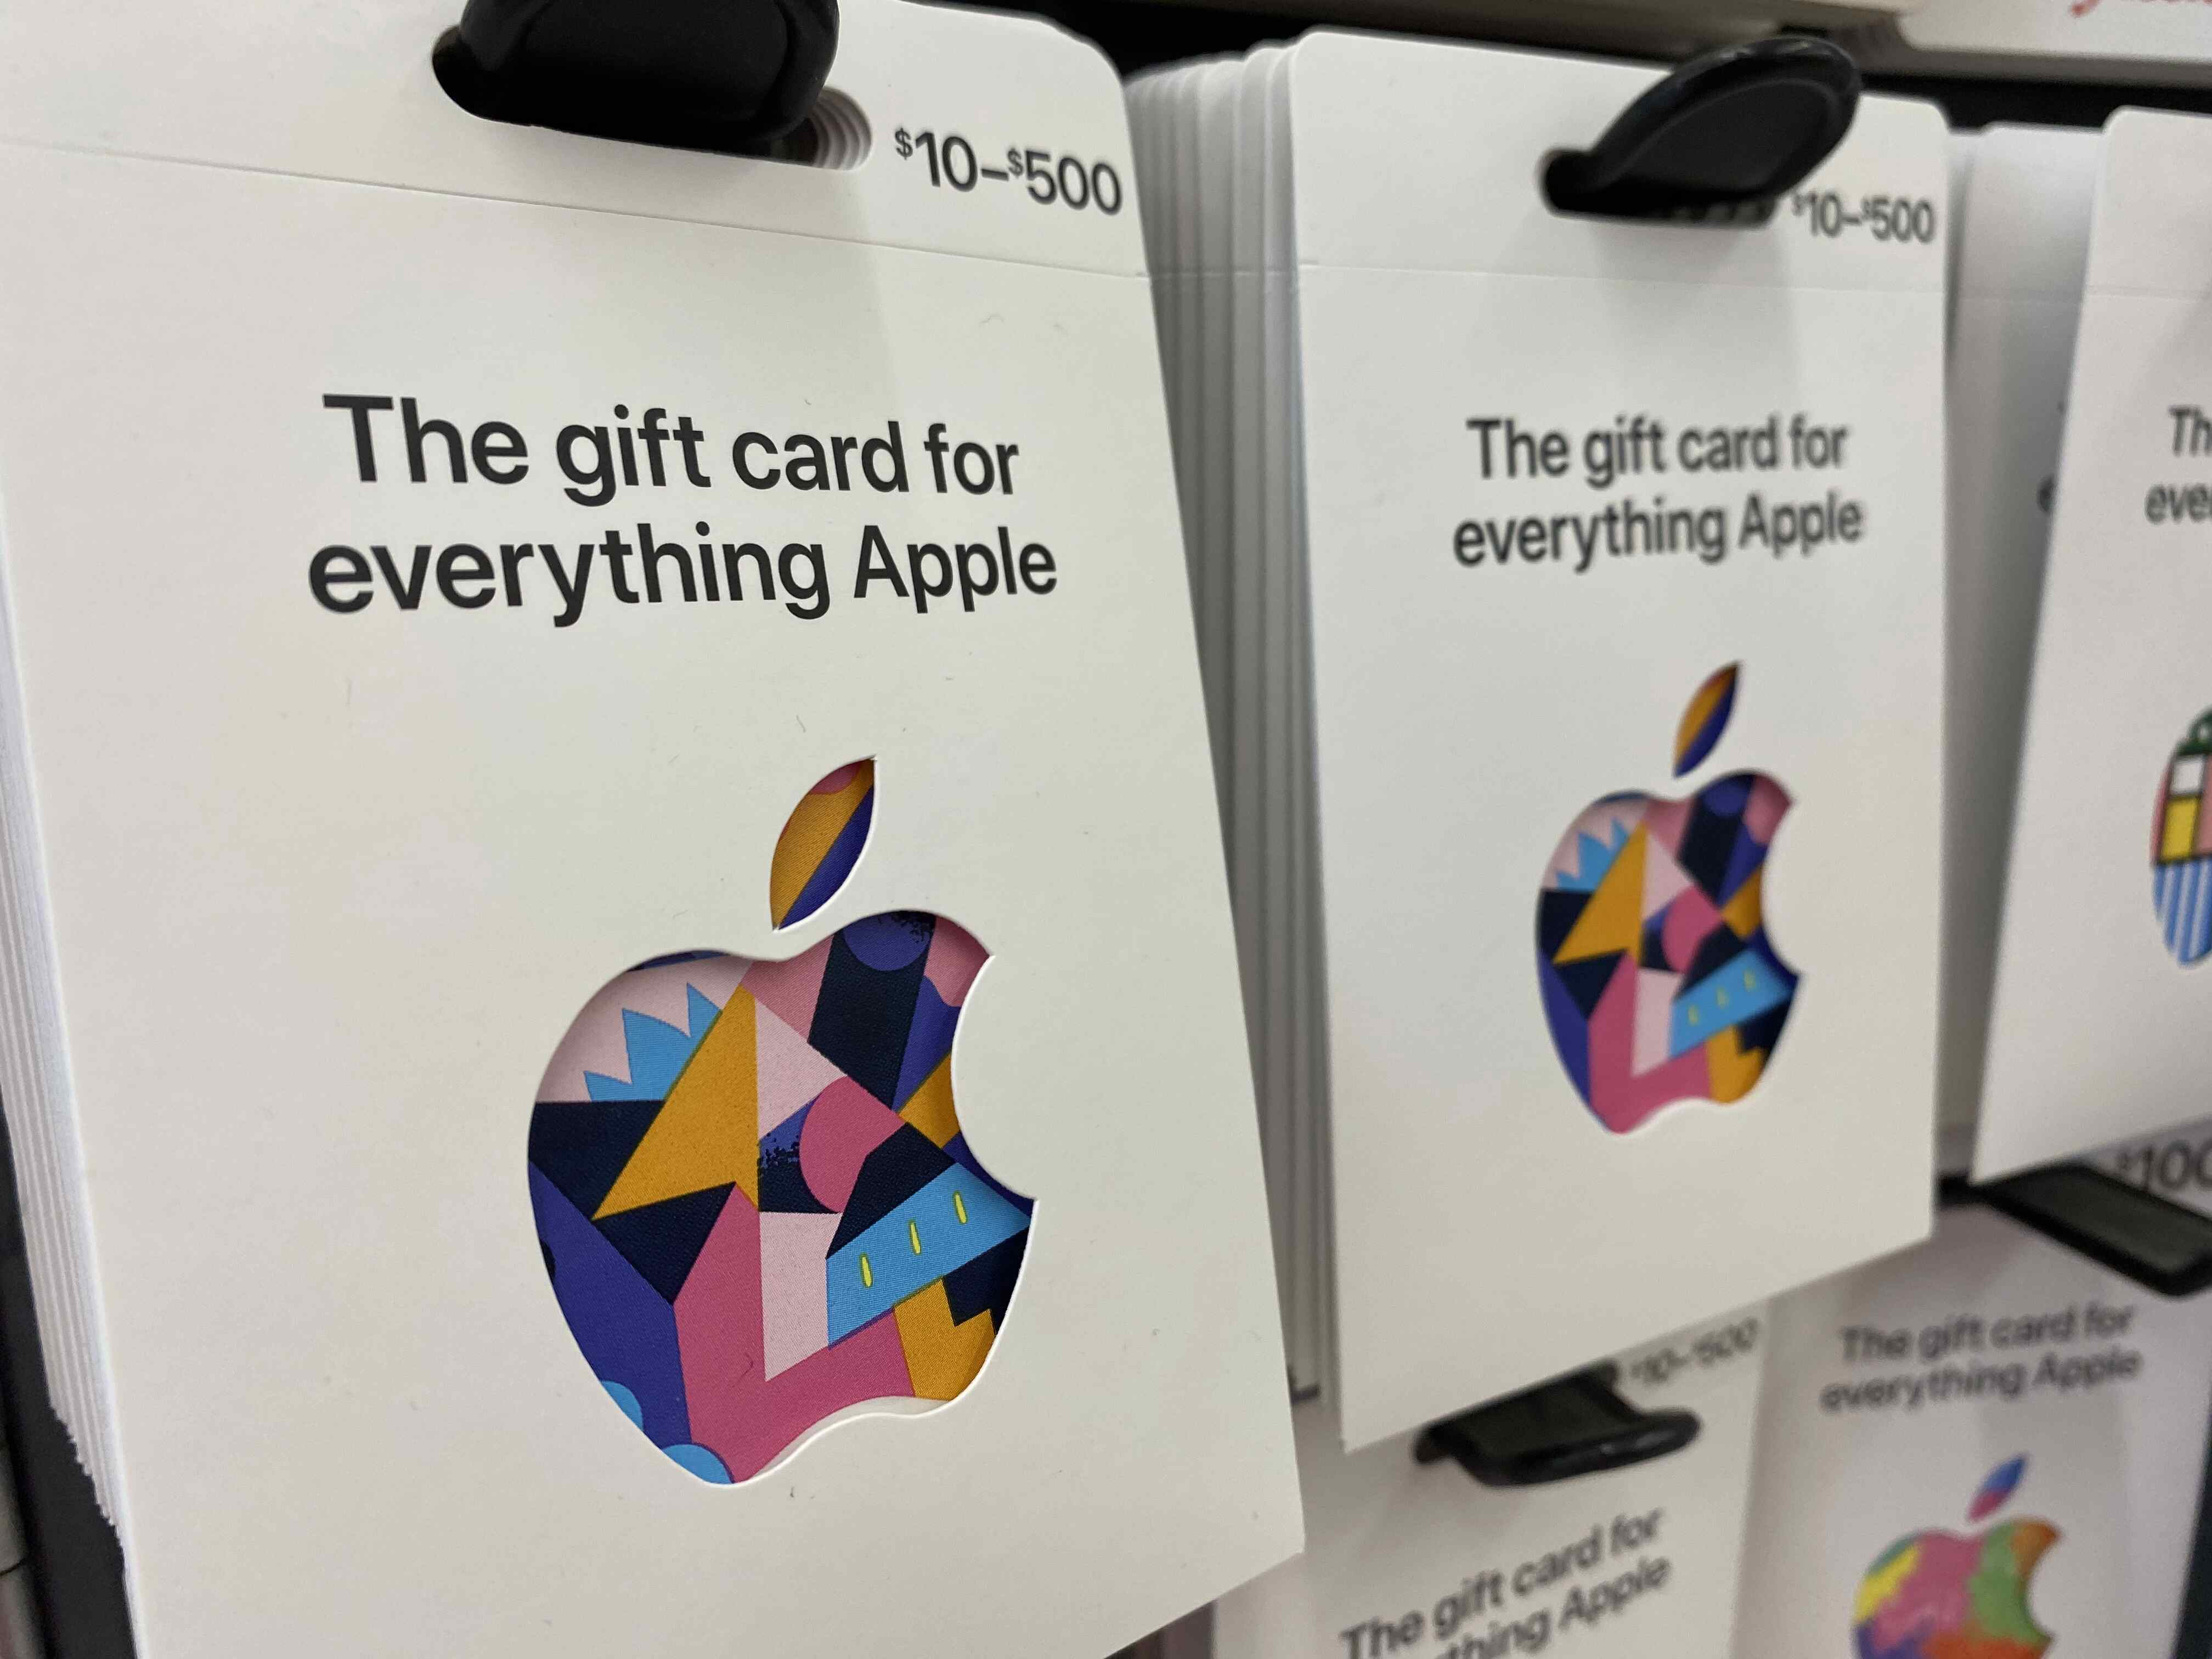 I Just Got An Apple Gift Card. Now What?